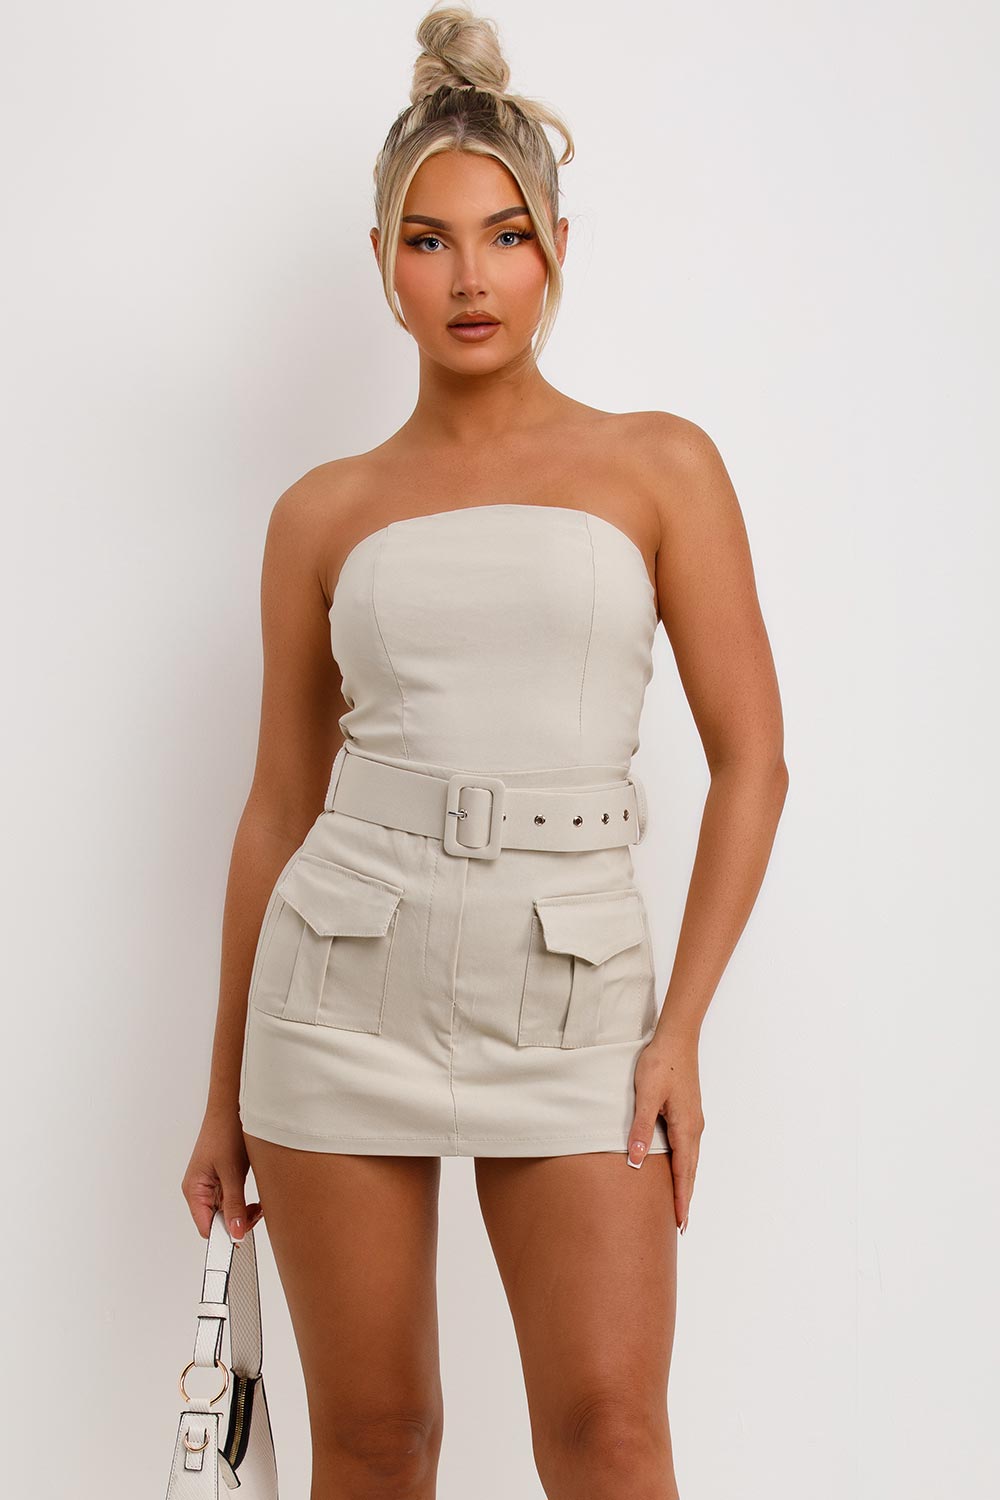 Skort Dress With Belt And Pockets Beige Going Out Festival Outfit –